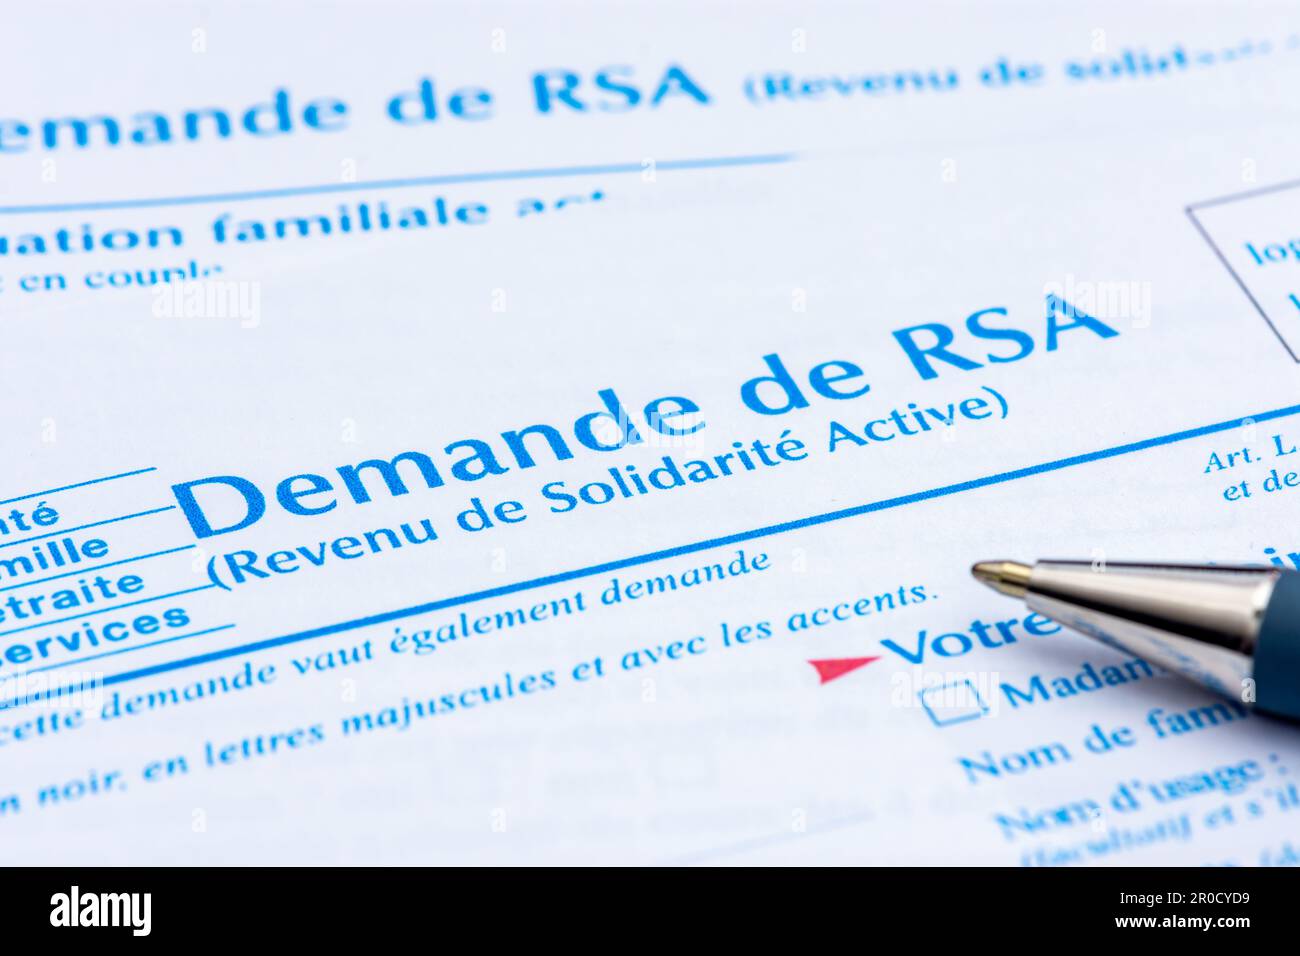 Application form for RSA (Revenu de solidarité active), an allowance providing people without resources in France with a minimum income Stock Photo